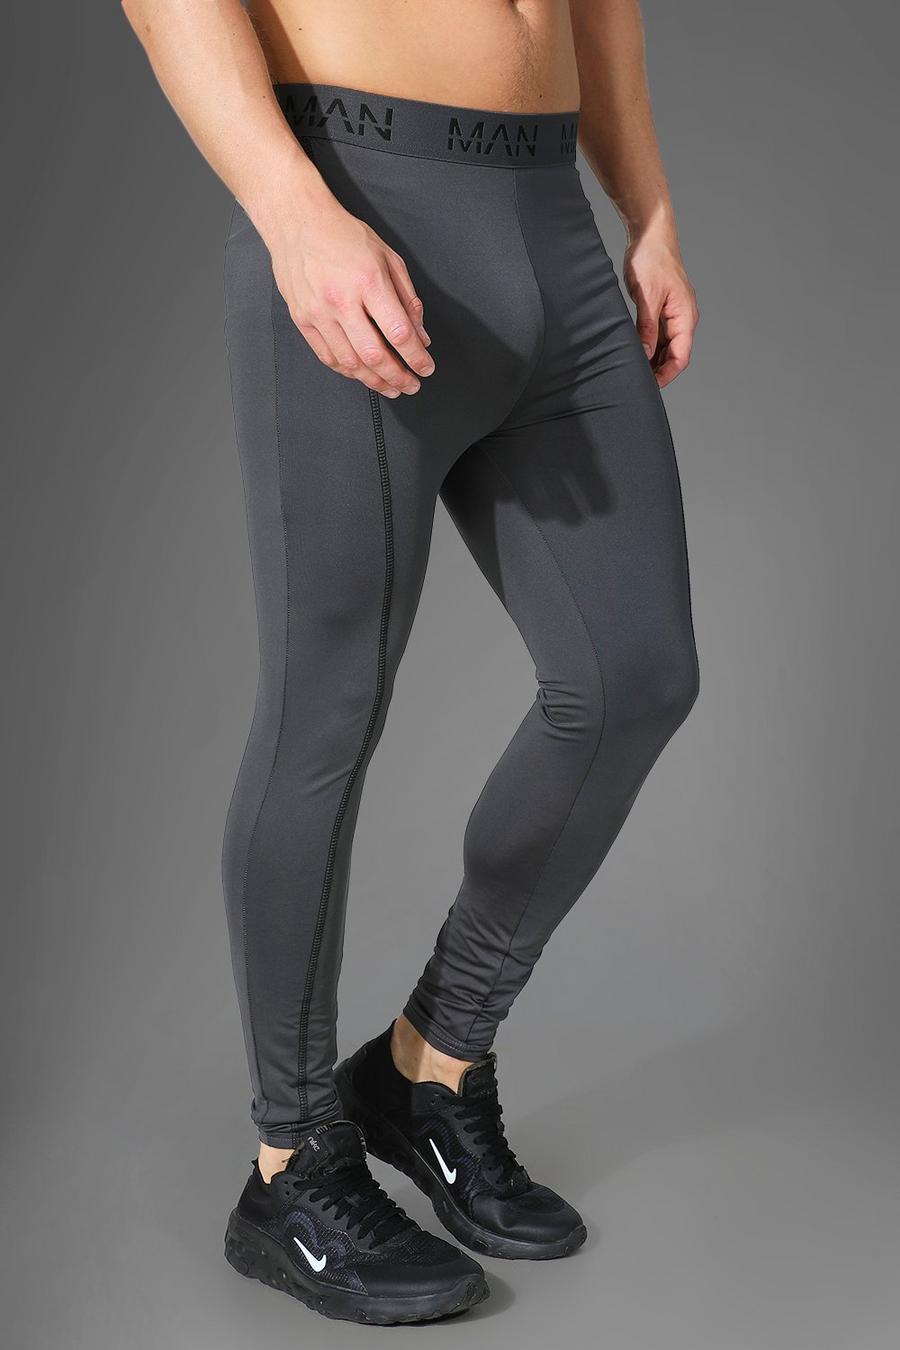 Legging Man Active Gym a compressione a contrasto, Charcoal image number 1